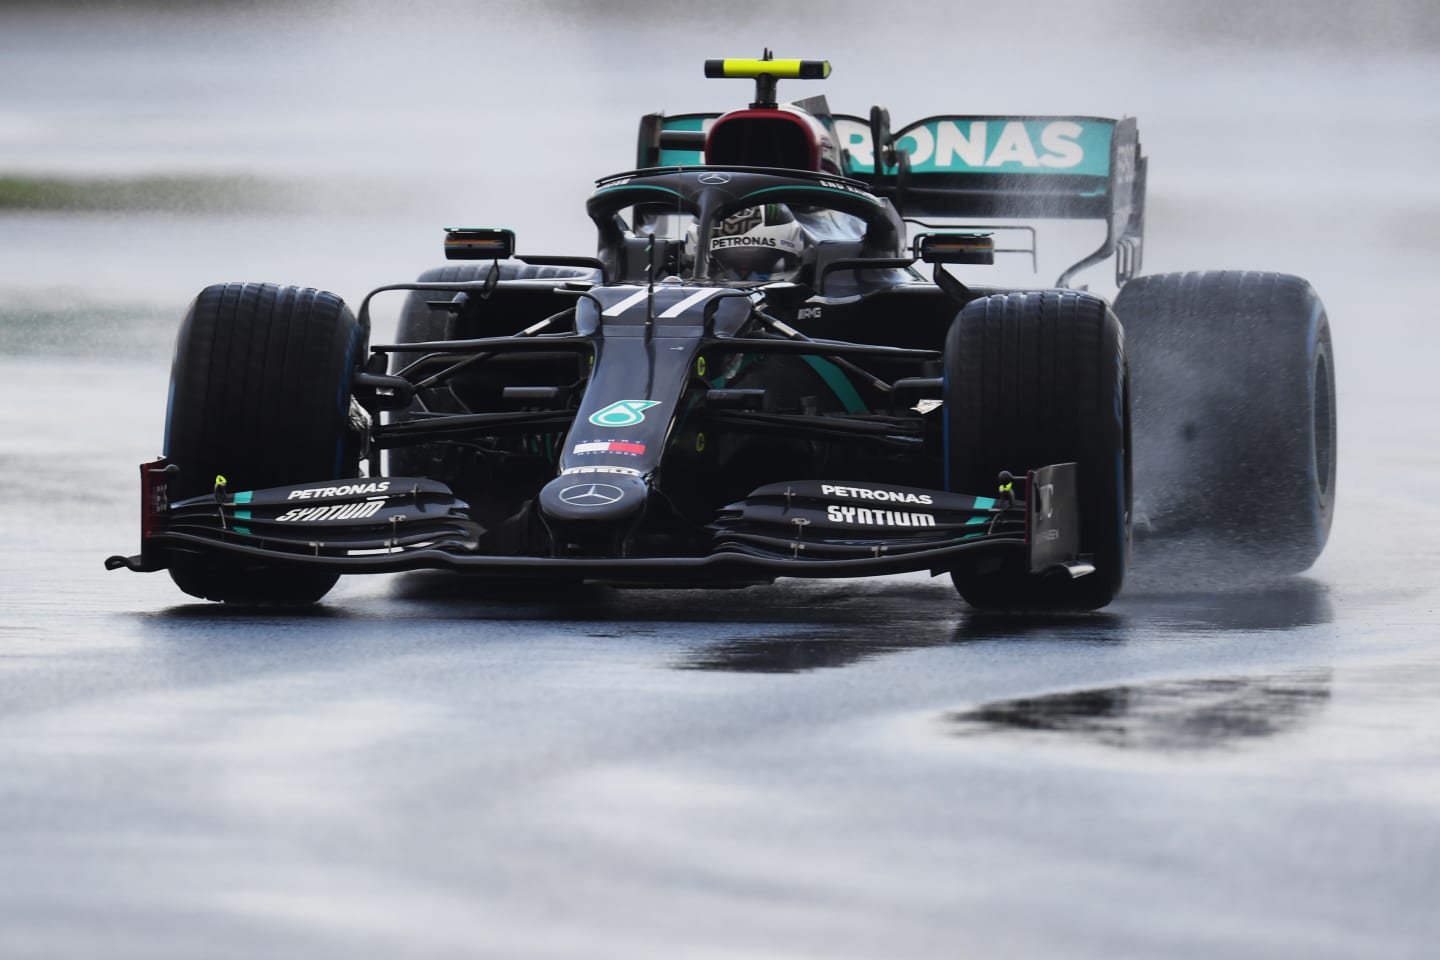 ISTANBUL, TURKEY - NOVEMBER 14: Valtteri Bottas of Finland driving the (77) Mercedes AMG Petronas F1 Team Mercedes W11 on track during qualifying ahead of the F1 Grand Prix of Turkey at Intercity Istanbul Park on November 14, 2020 in Istanbul, Turkey. (Photo by Clive Mason/Getty Images)